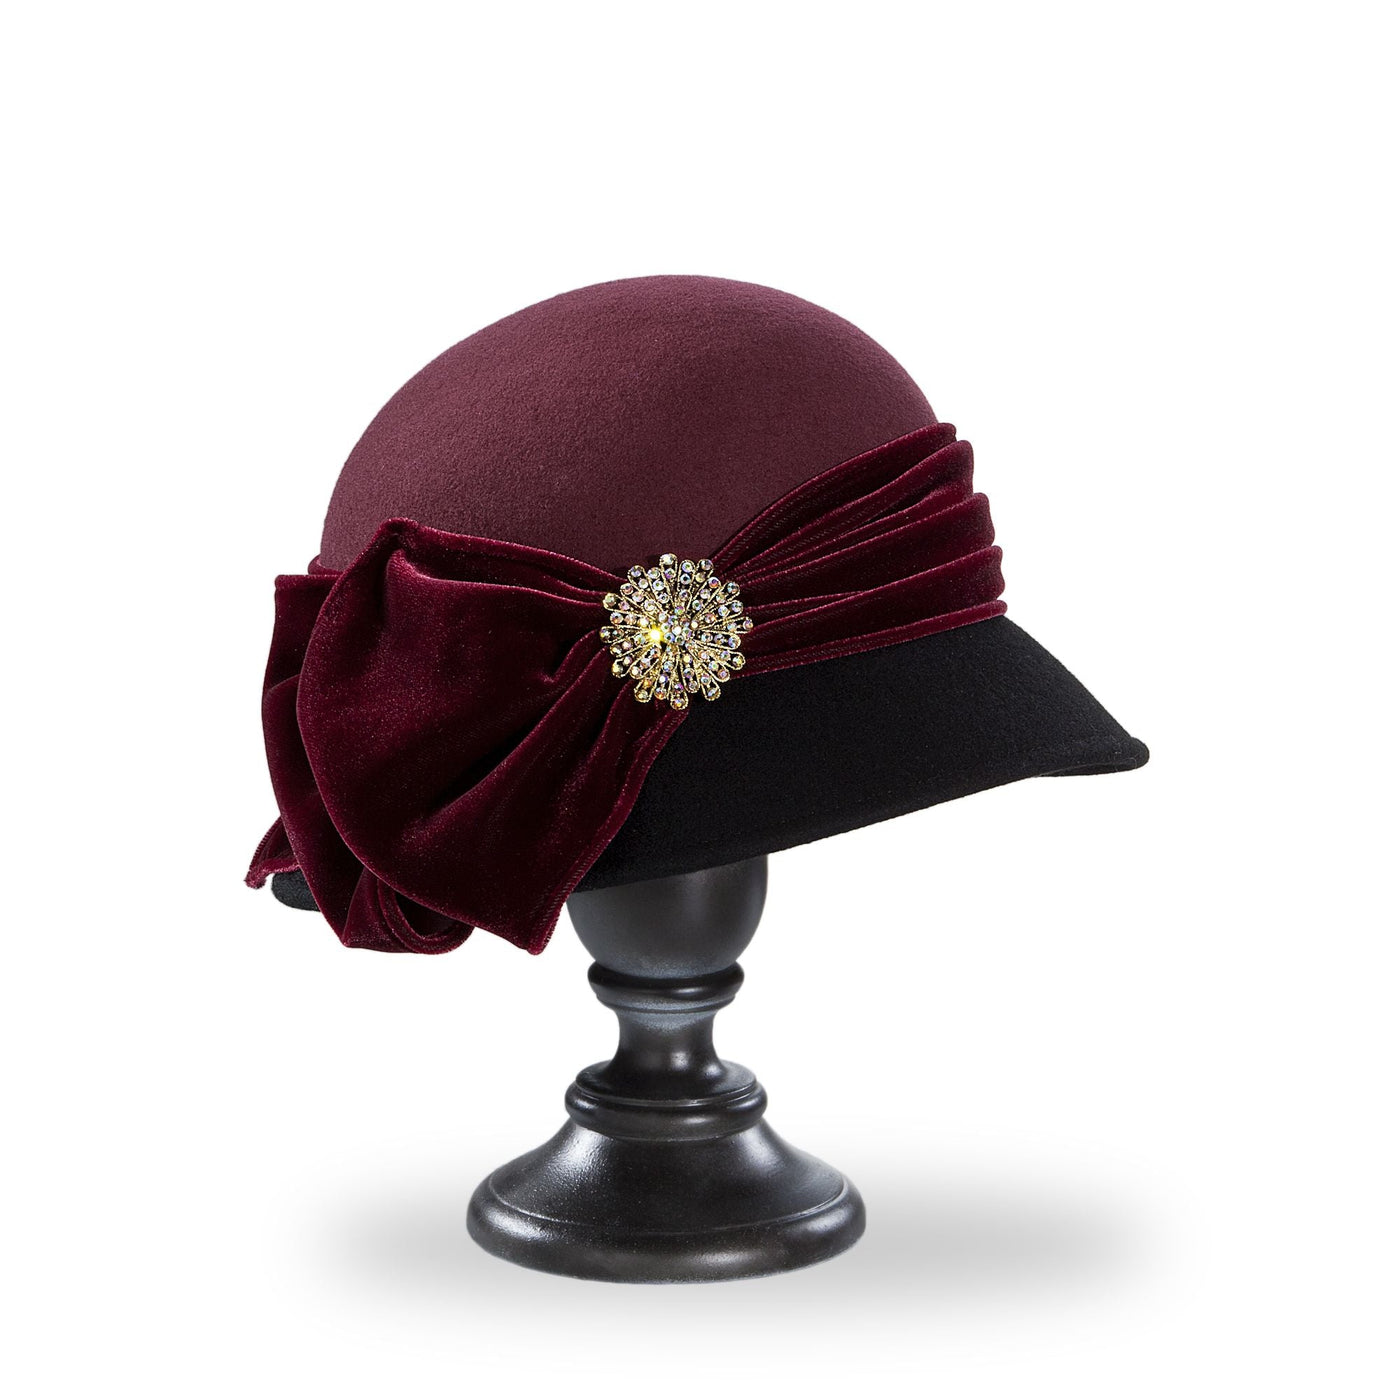 2019 Edition Valerie Two-Toned Wool Cloche